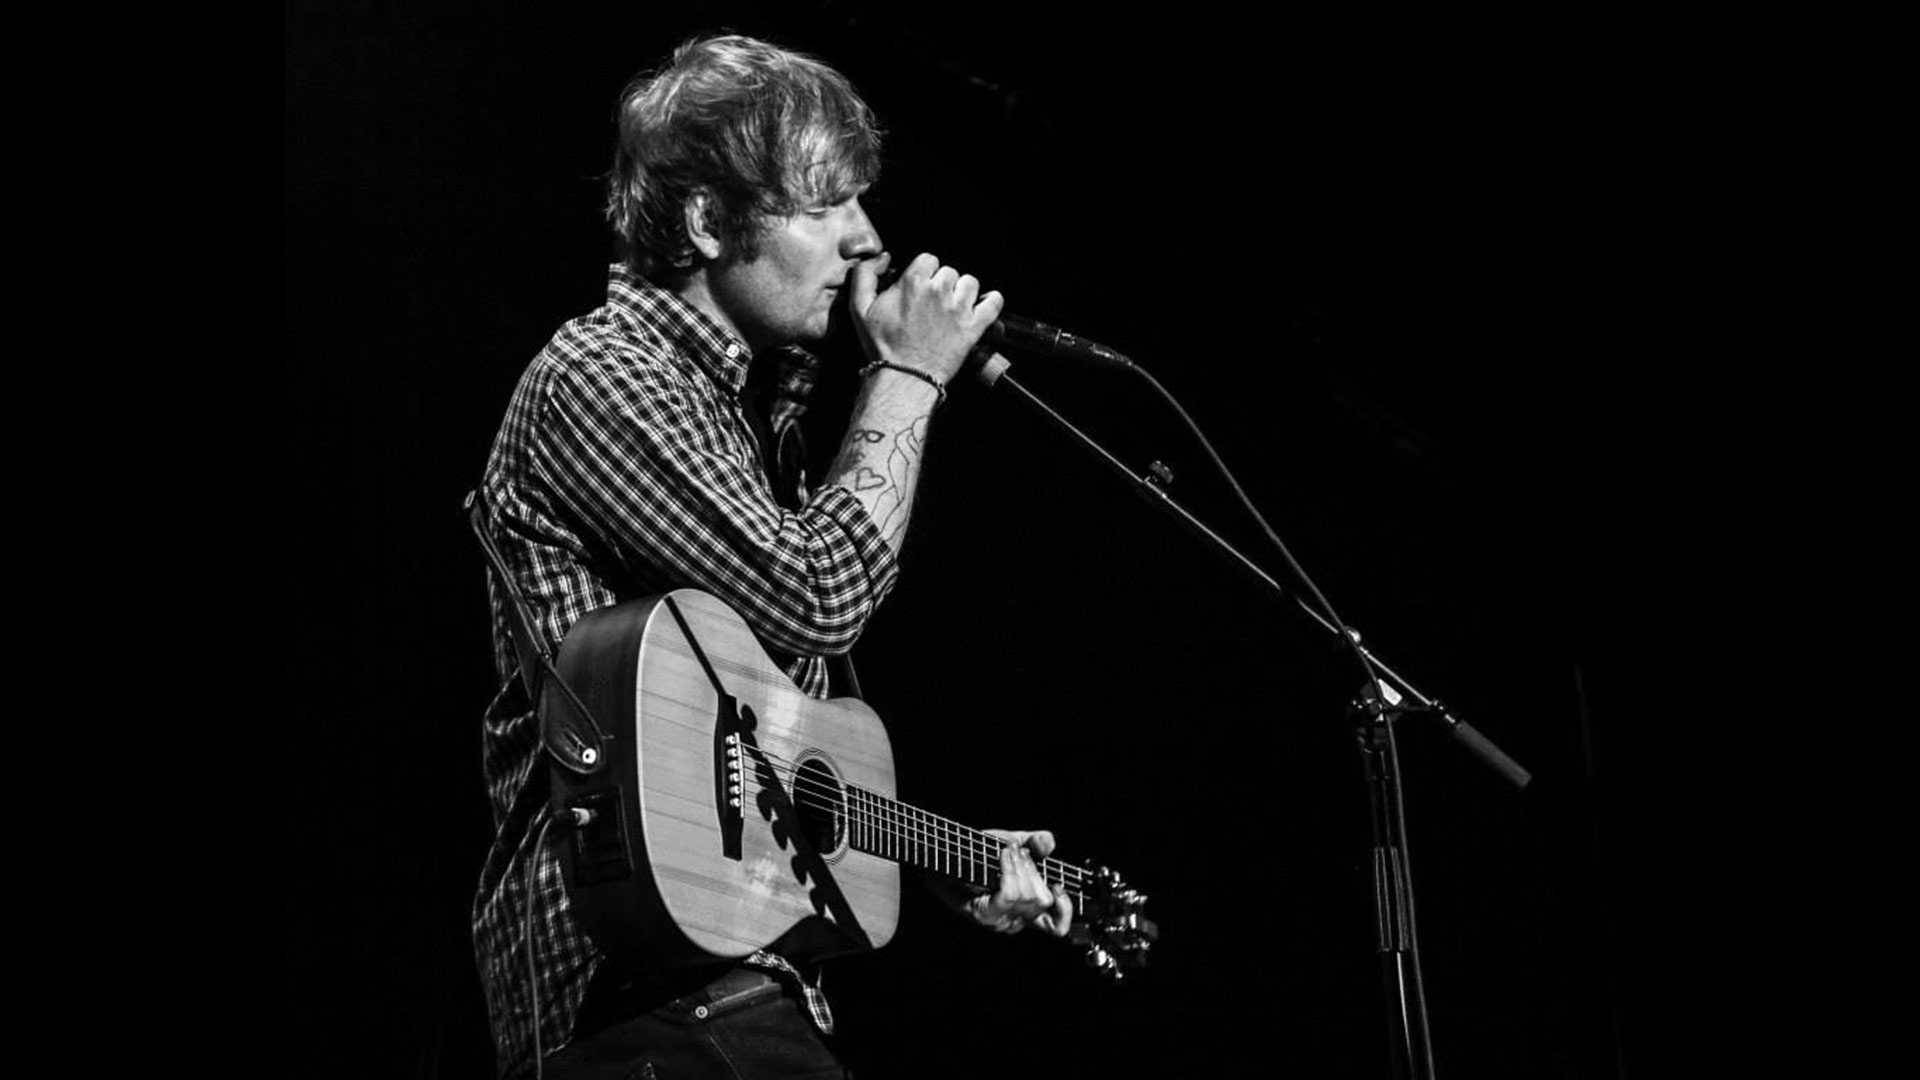 Ed Sheeran strumming away in front of a Live Audience Wallpaper